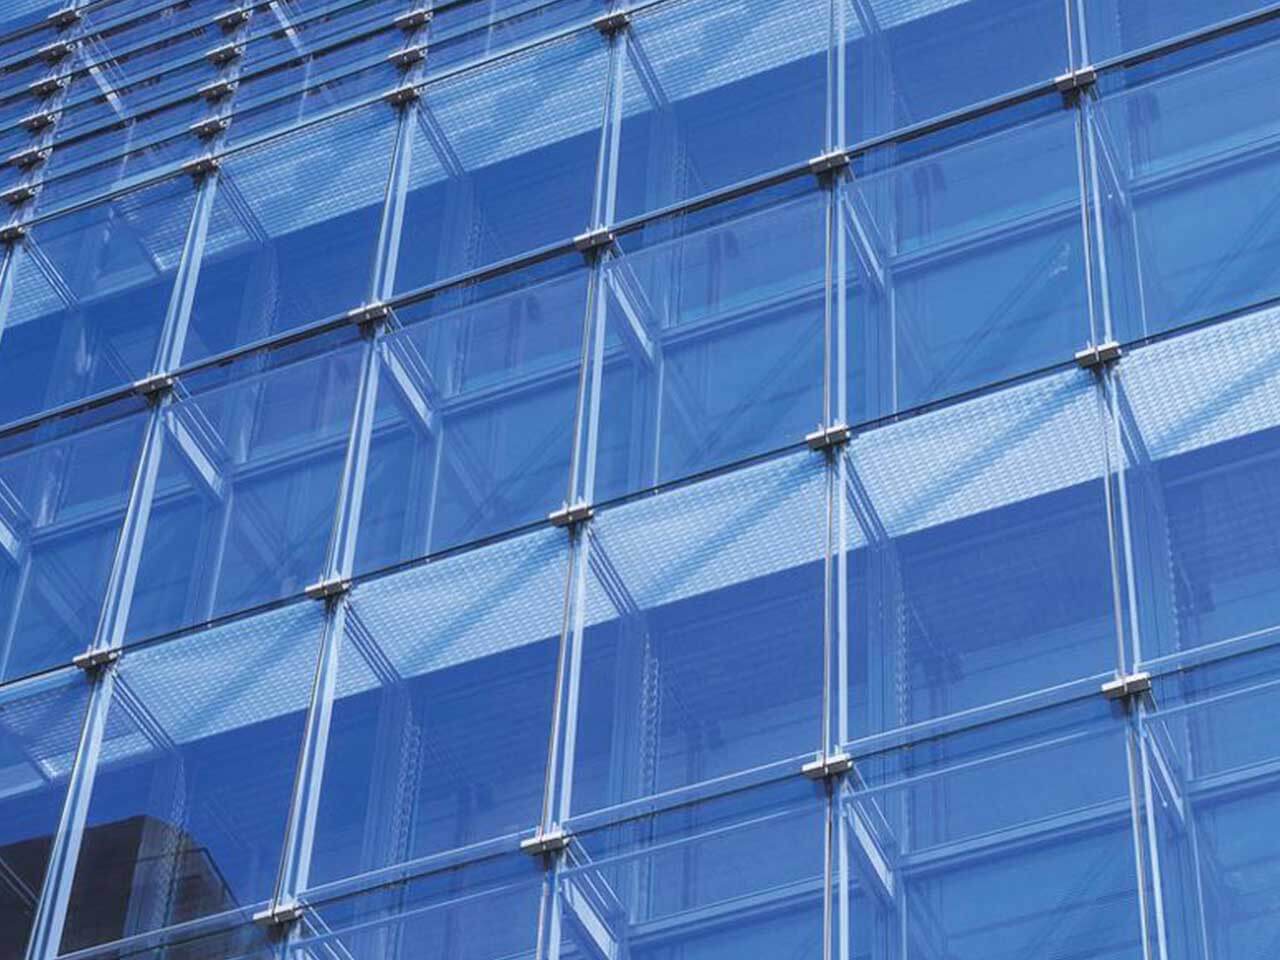 Glass Wall Cladding Manufacturers in Kochi

